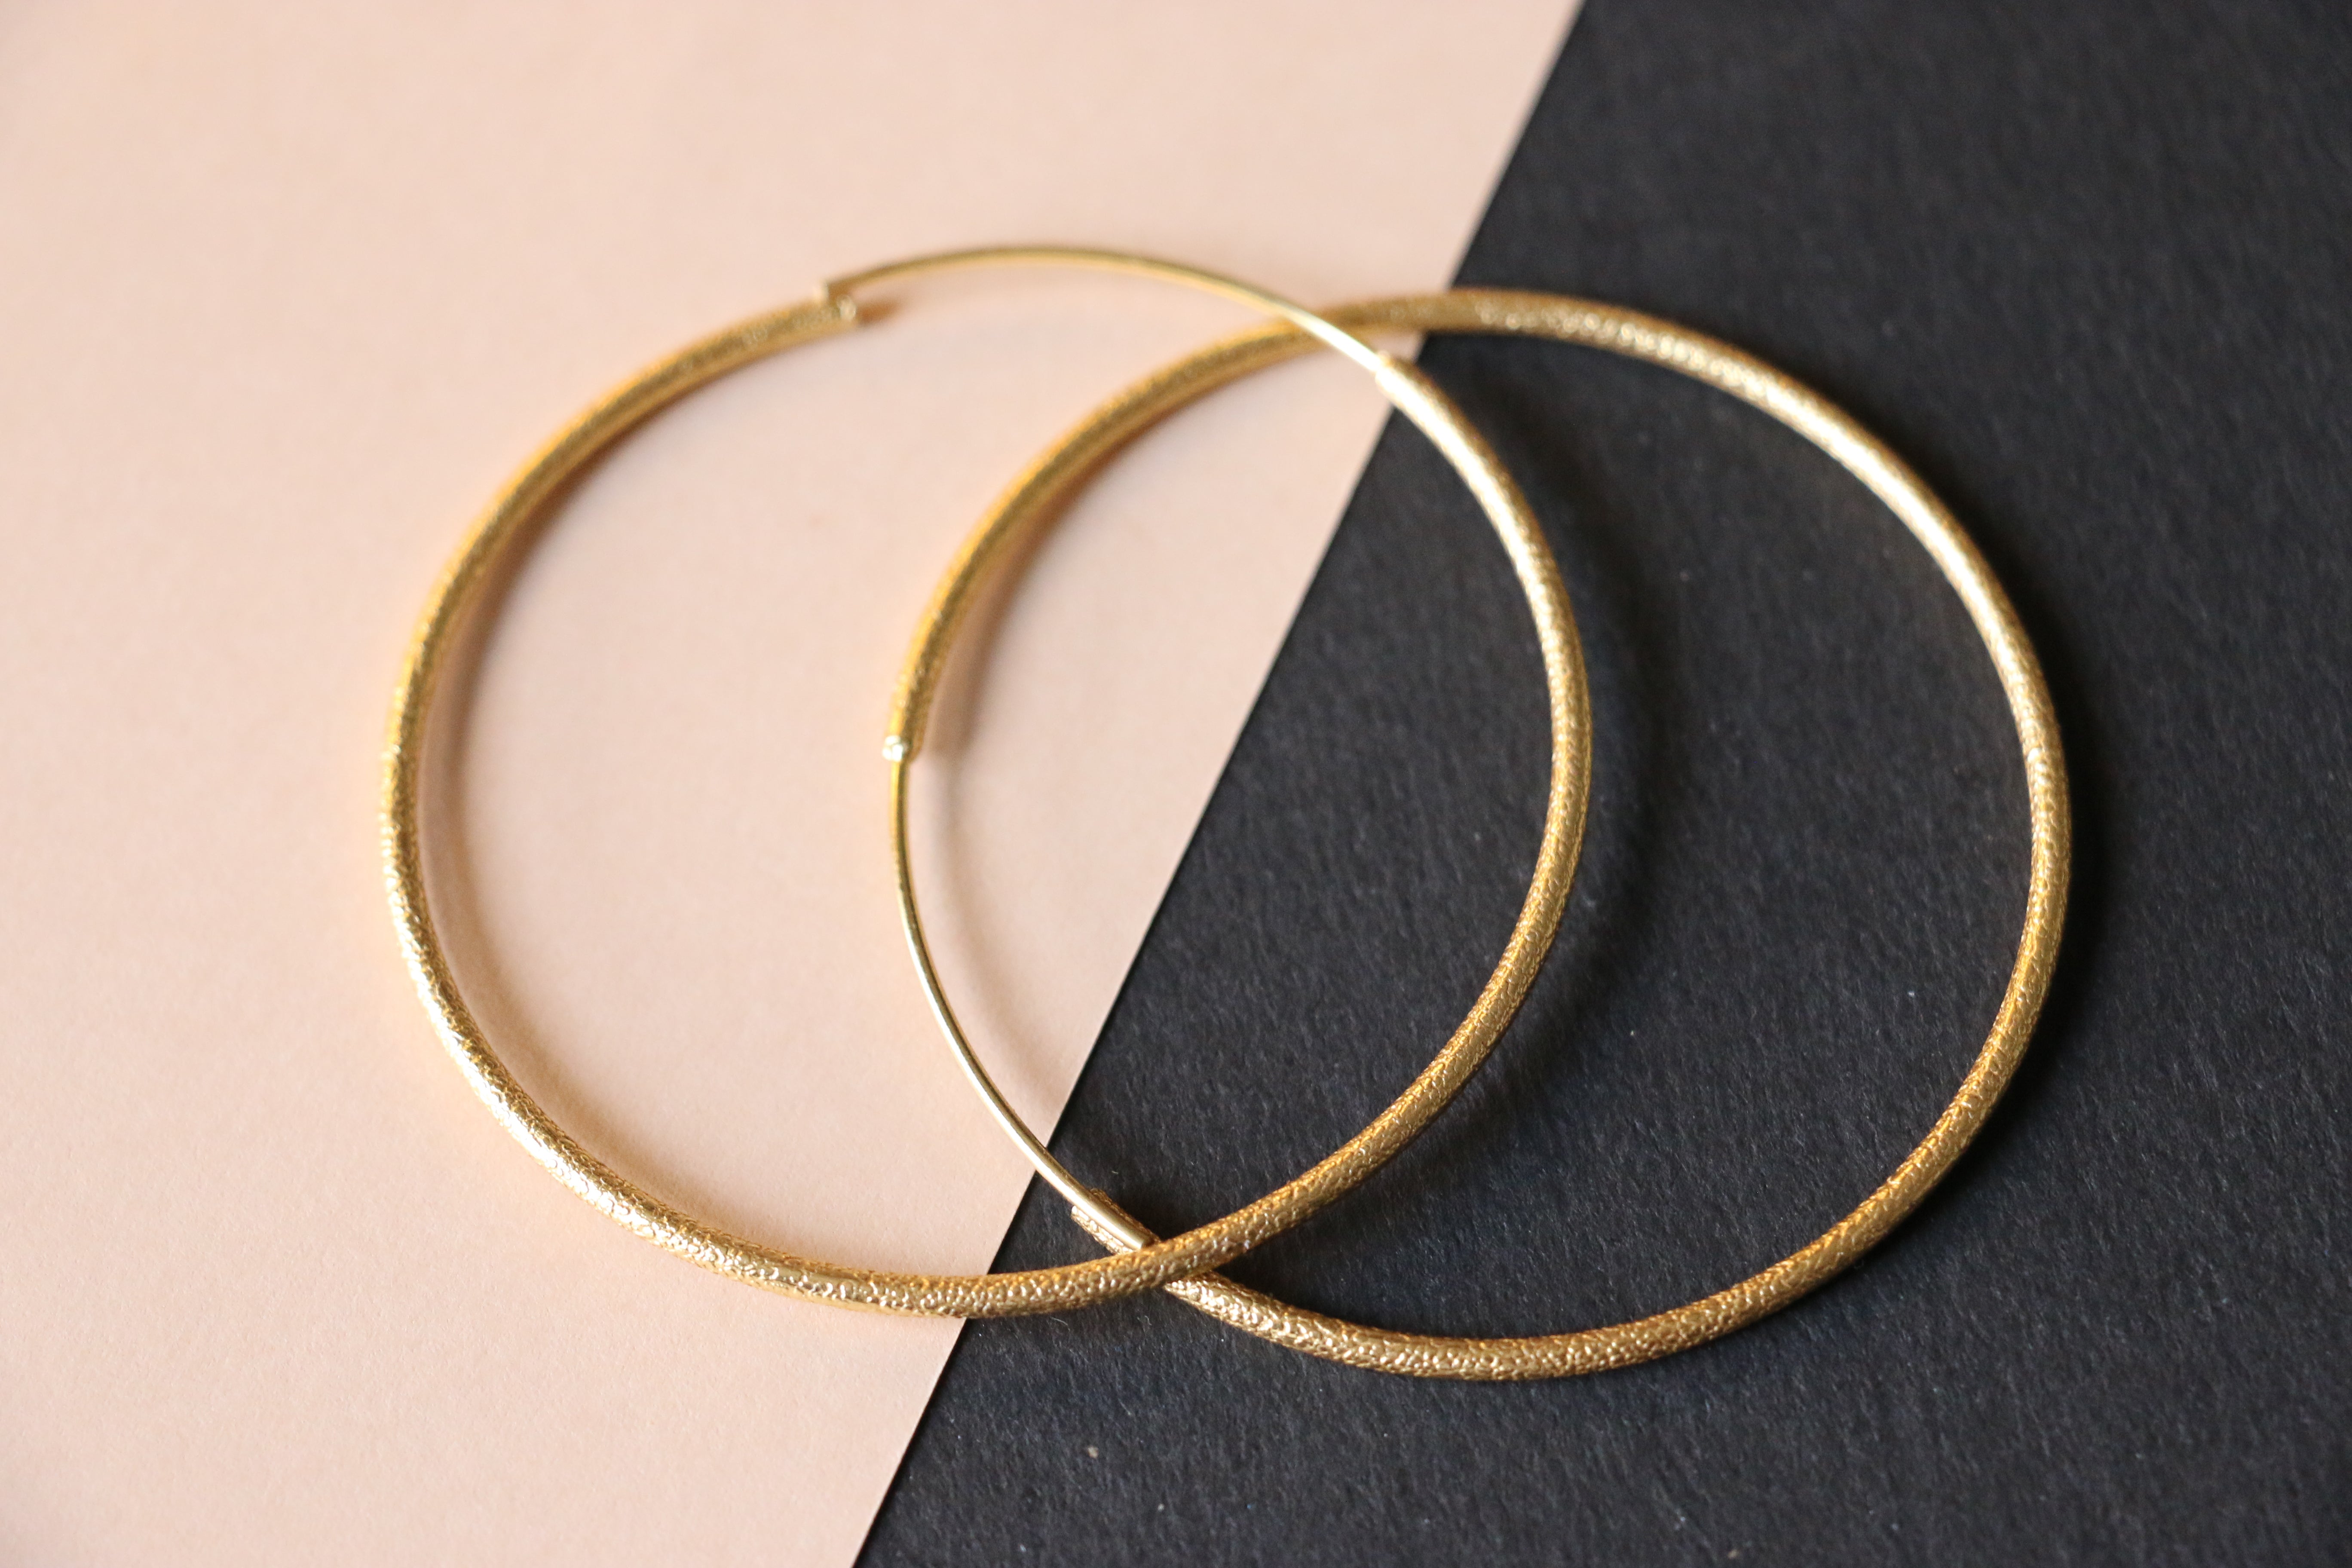 Giant round ear hoops